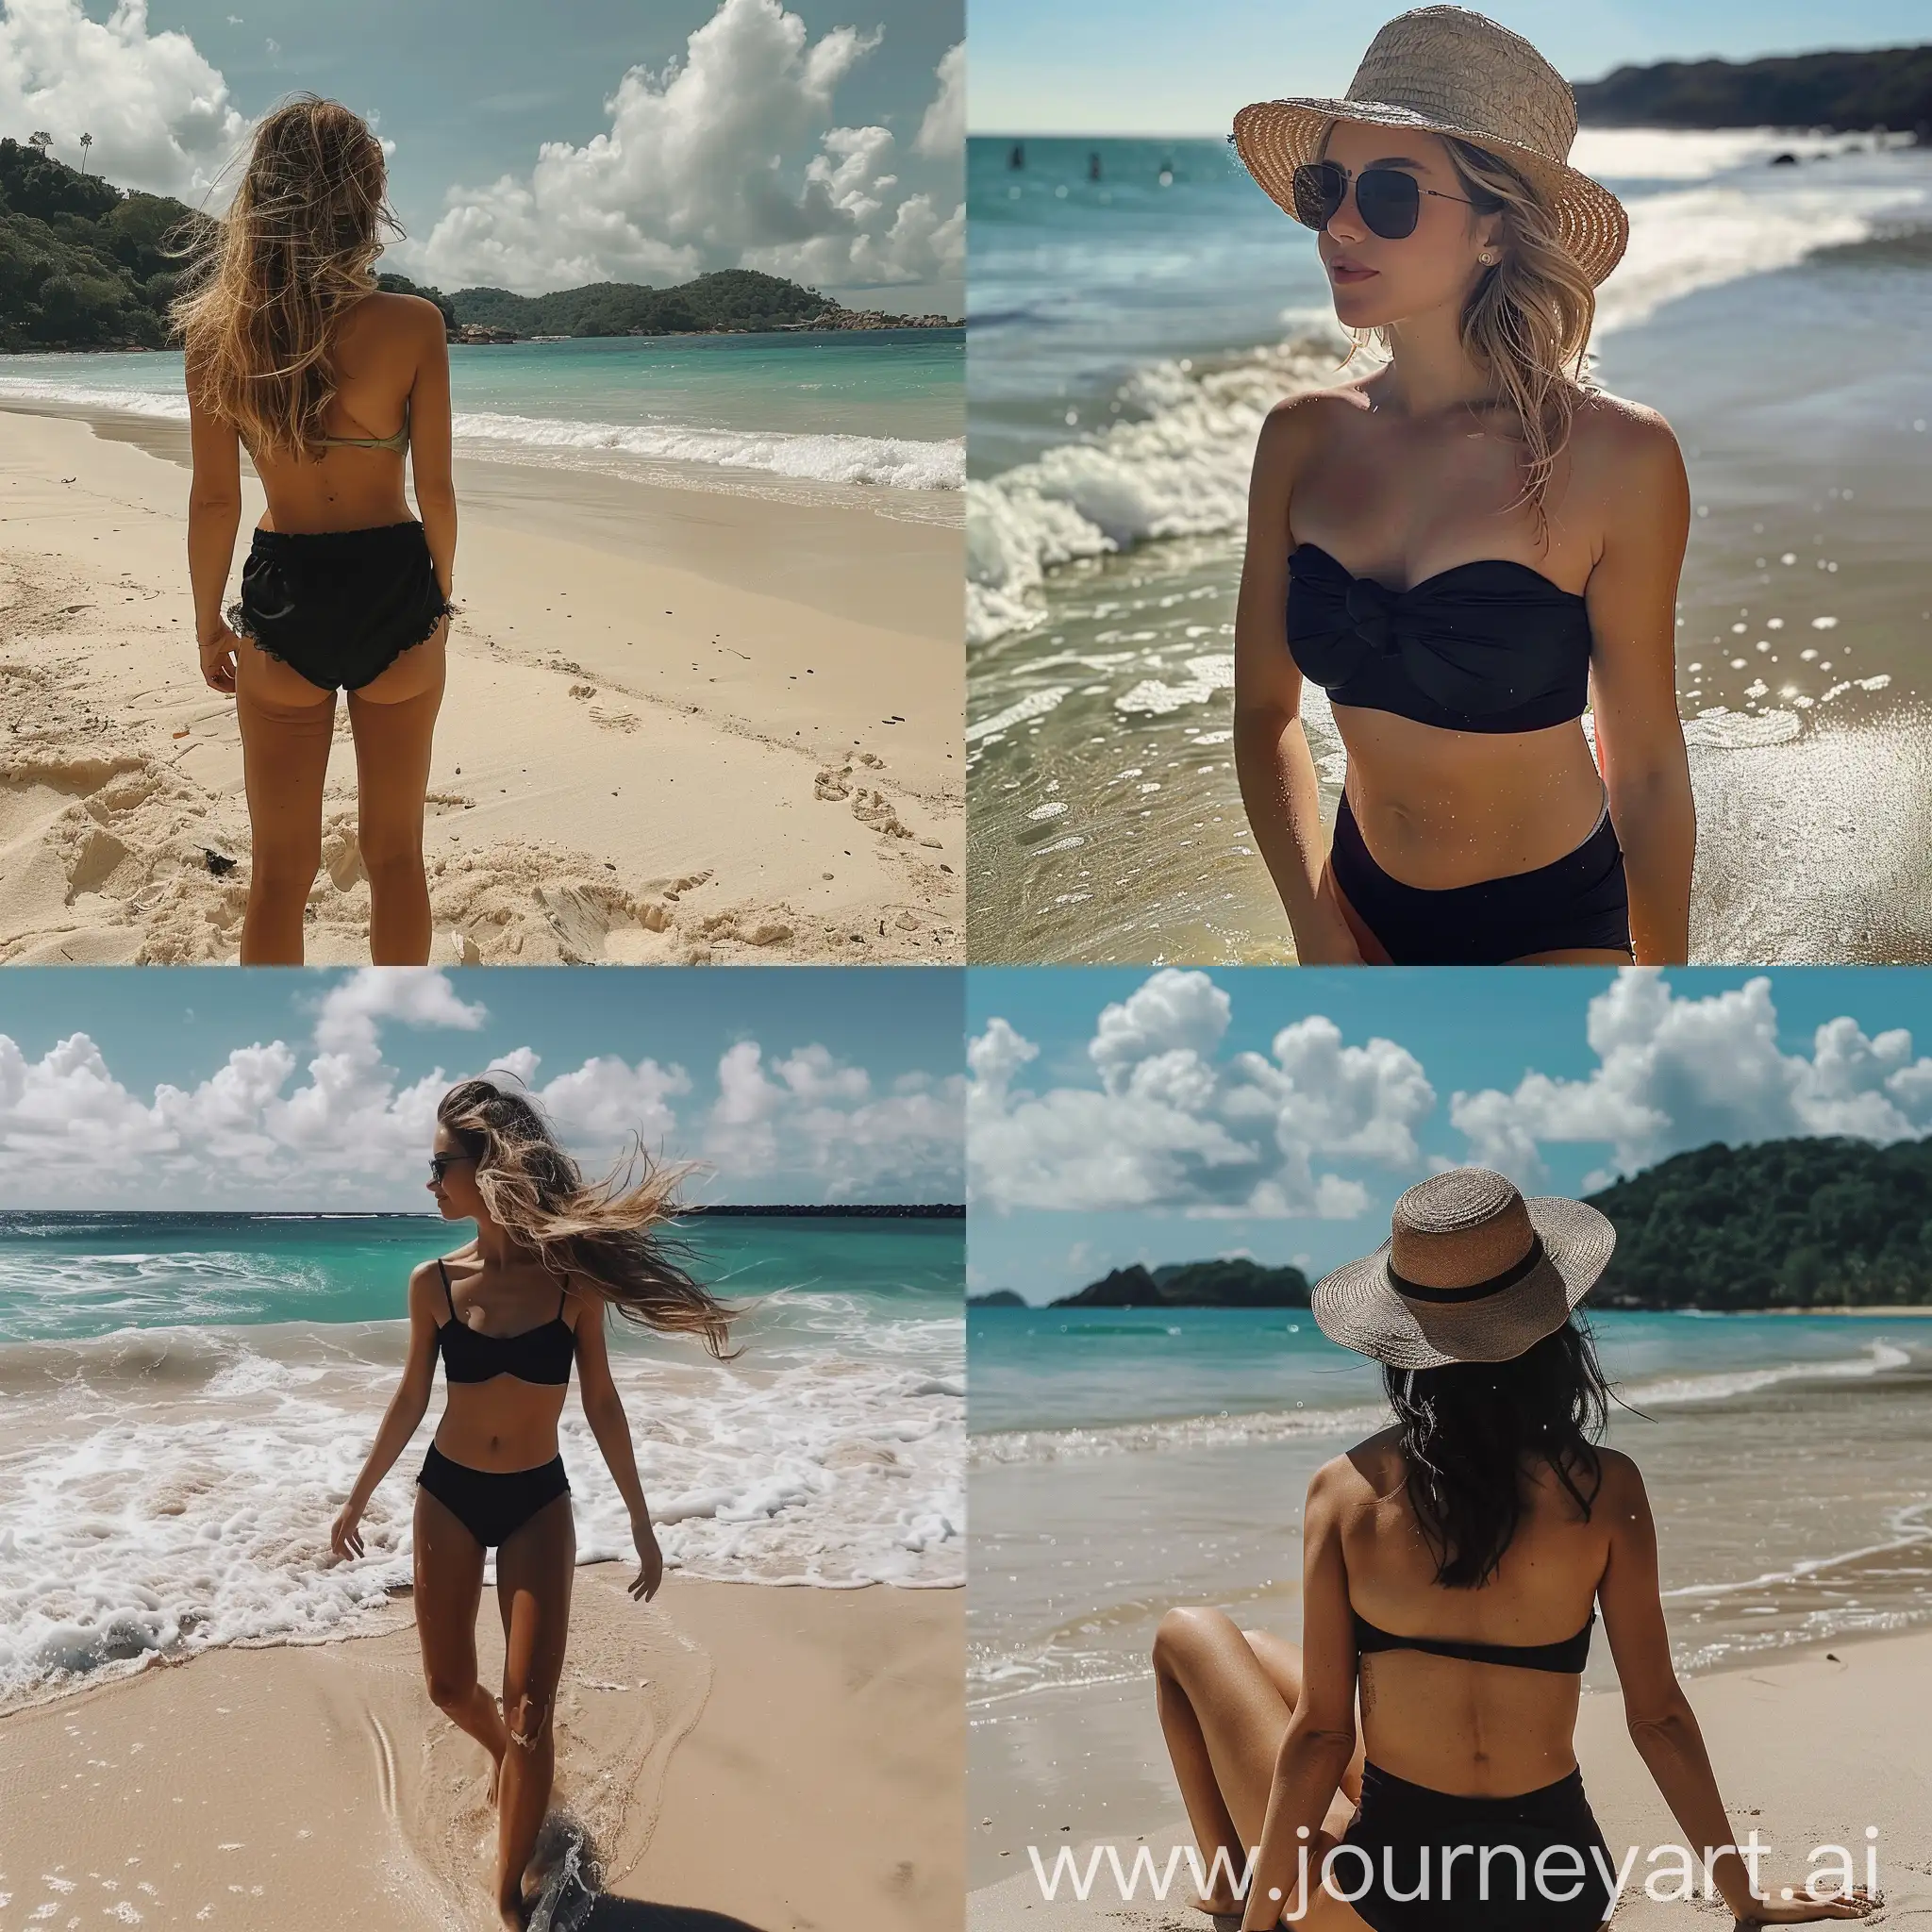 Young-Woman-Enjoying-a-Beach-Day-in-Stylish-Black-Outfit